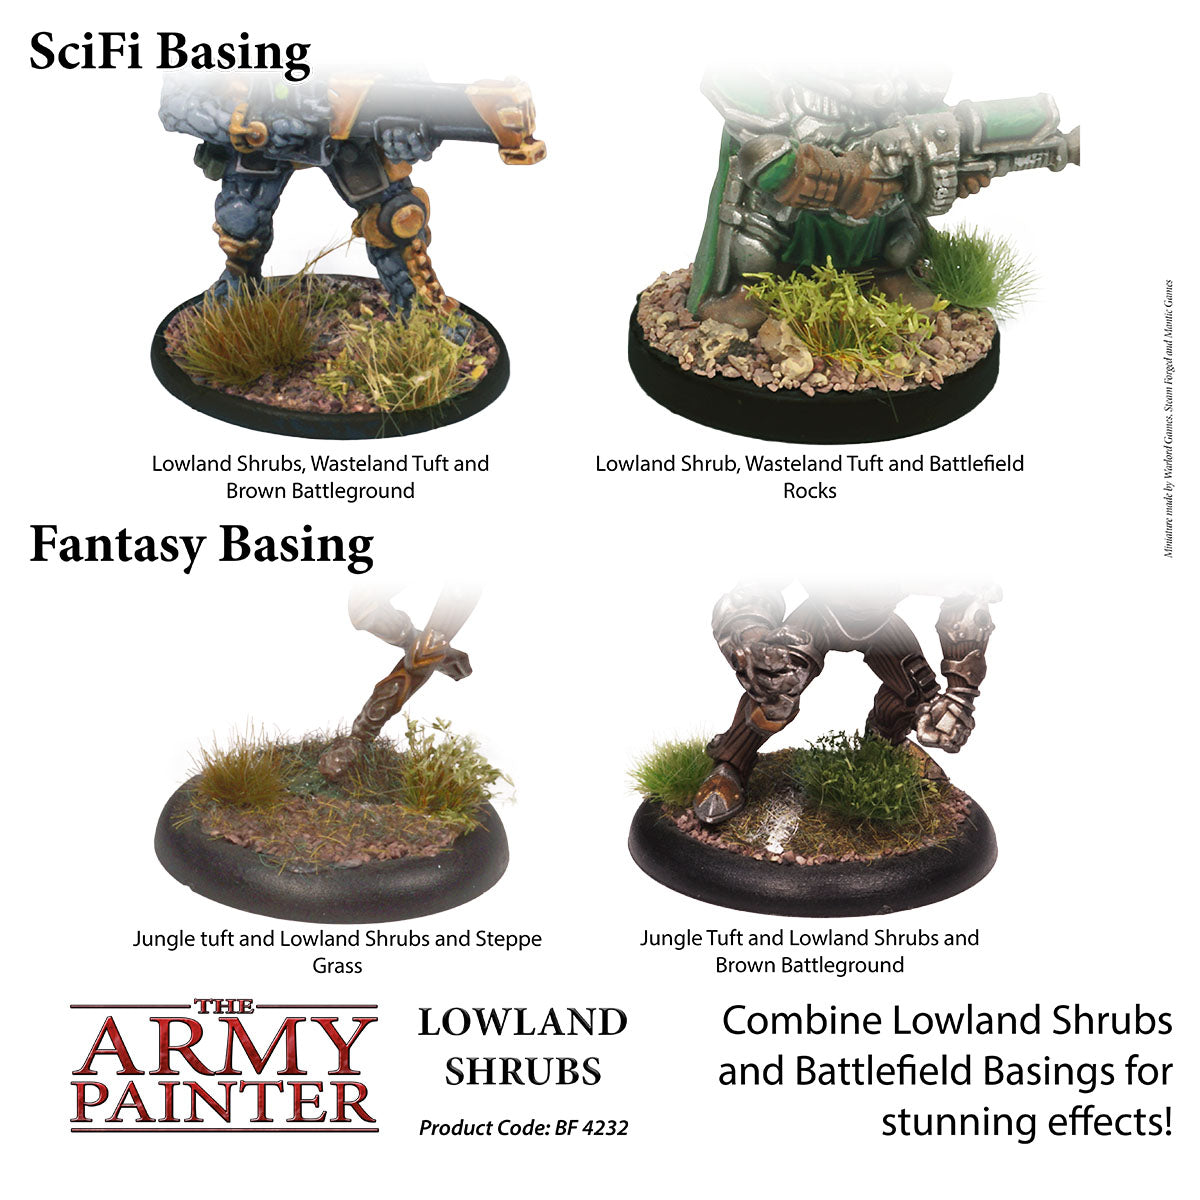 The Army Painter - Lowland Shrubs BF4232